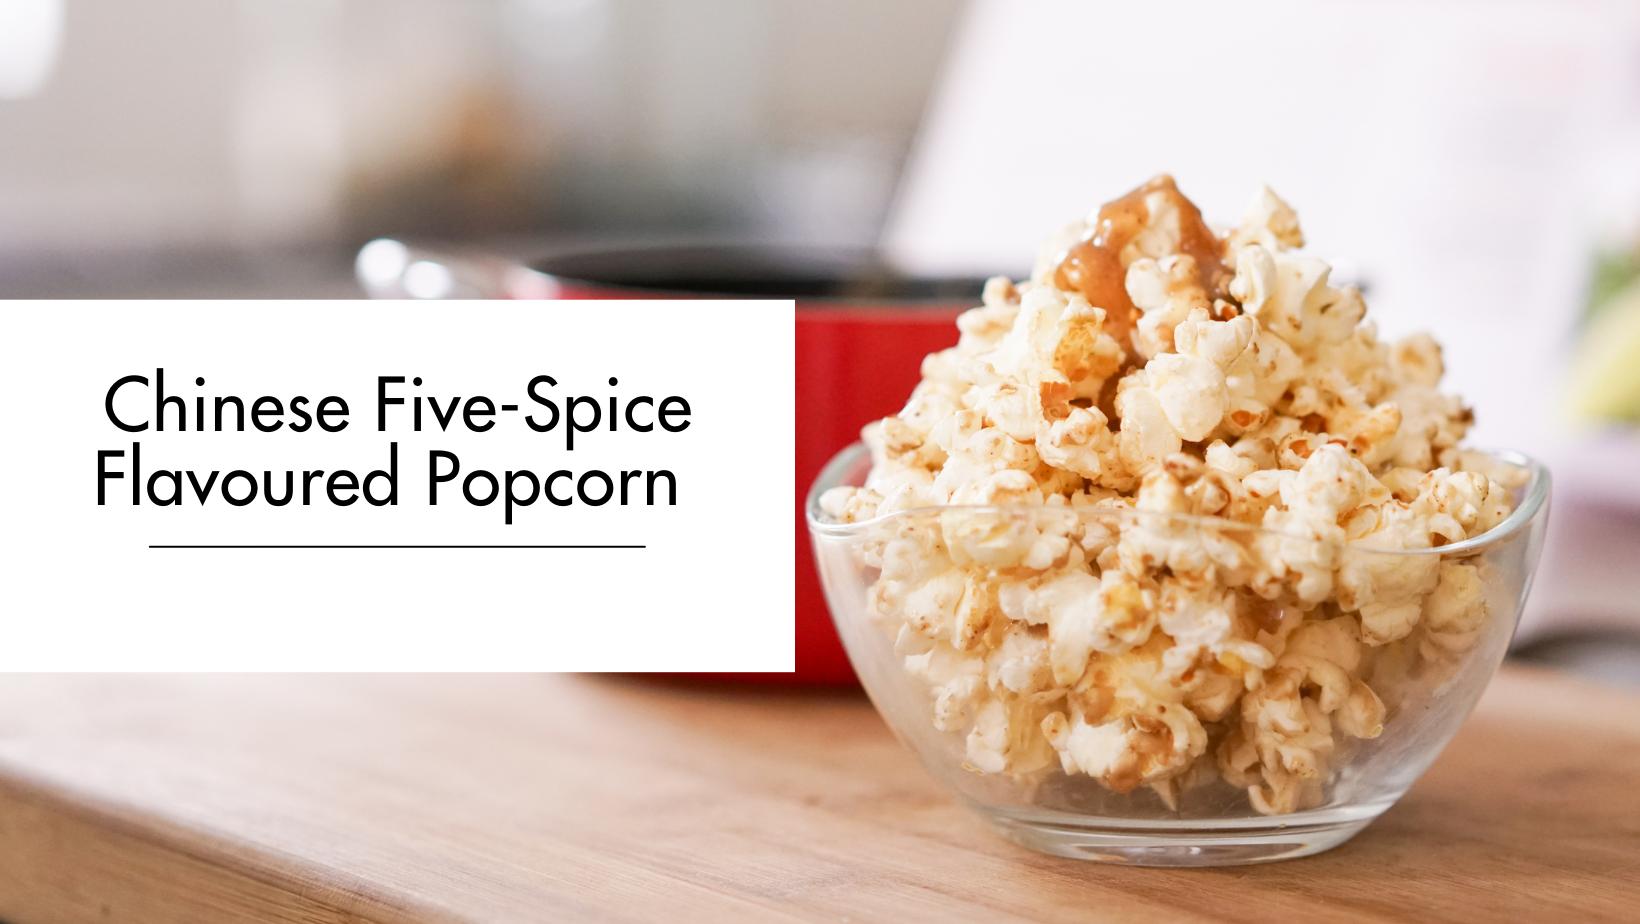 Chinese Five-Spice Flavoured Popcorn